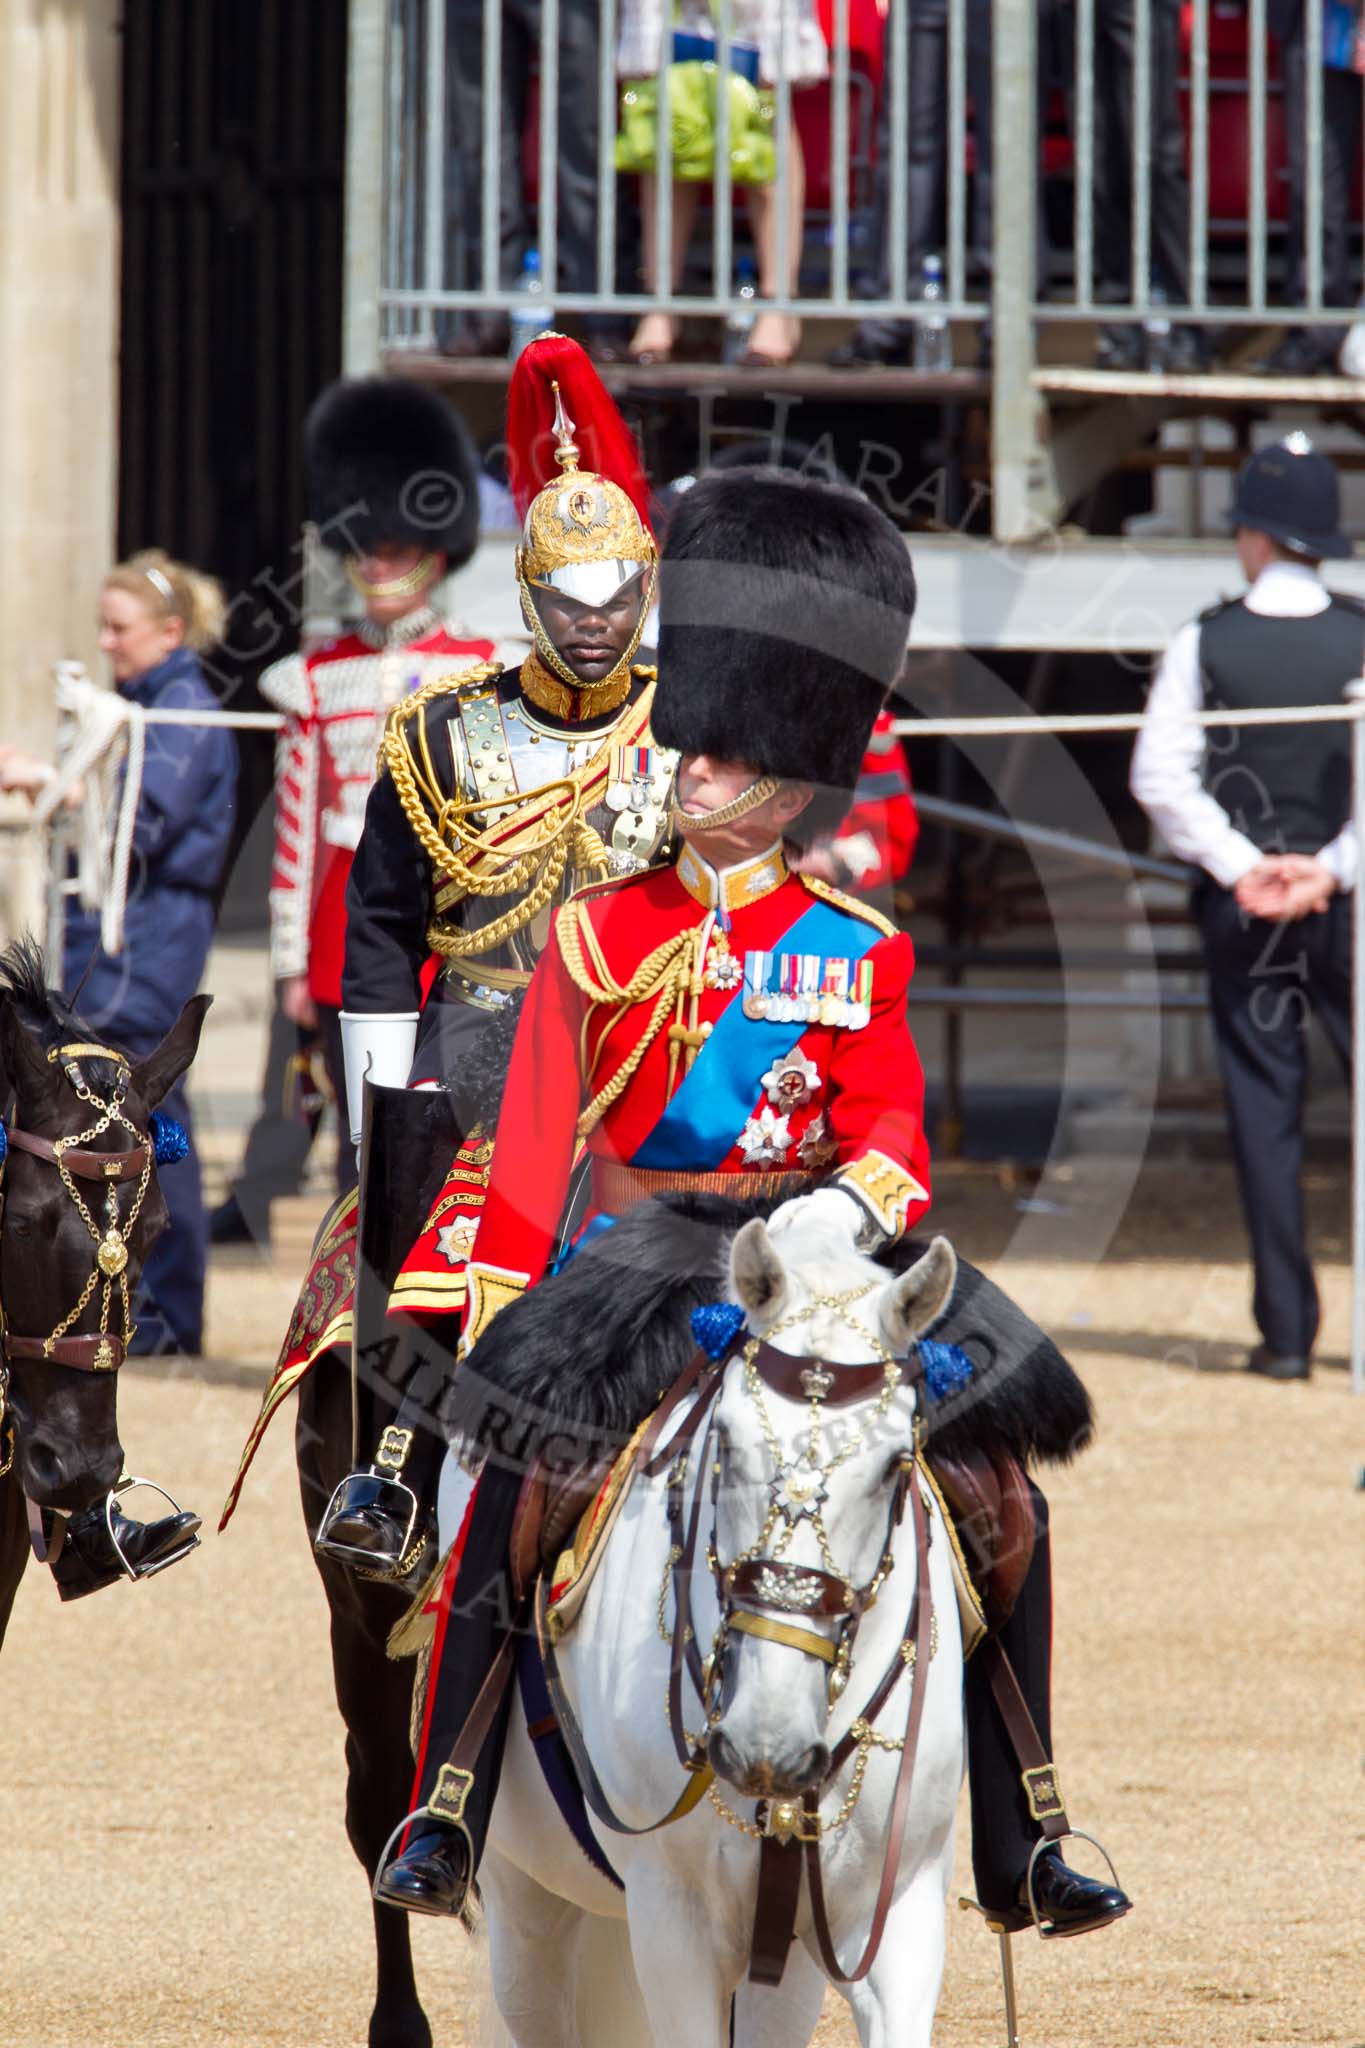 The Colonel's Review 2011: HRH Prince Edward, The Duke of Kent, Colonel Scots Guards. 'The Colonel's Review' is his review, behind him Major Twumasi-Ankrah, Blues and Royals, in place of the Princess Royal..
Horse Guards Parade, Westminster,
London SW1,

United Kingdom,
on 04 June 2011 at 10:59, image #77